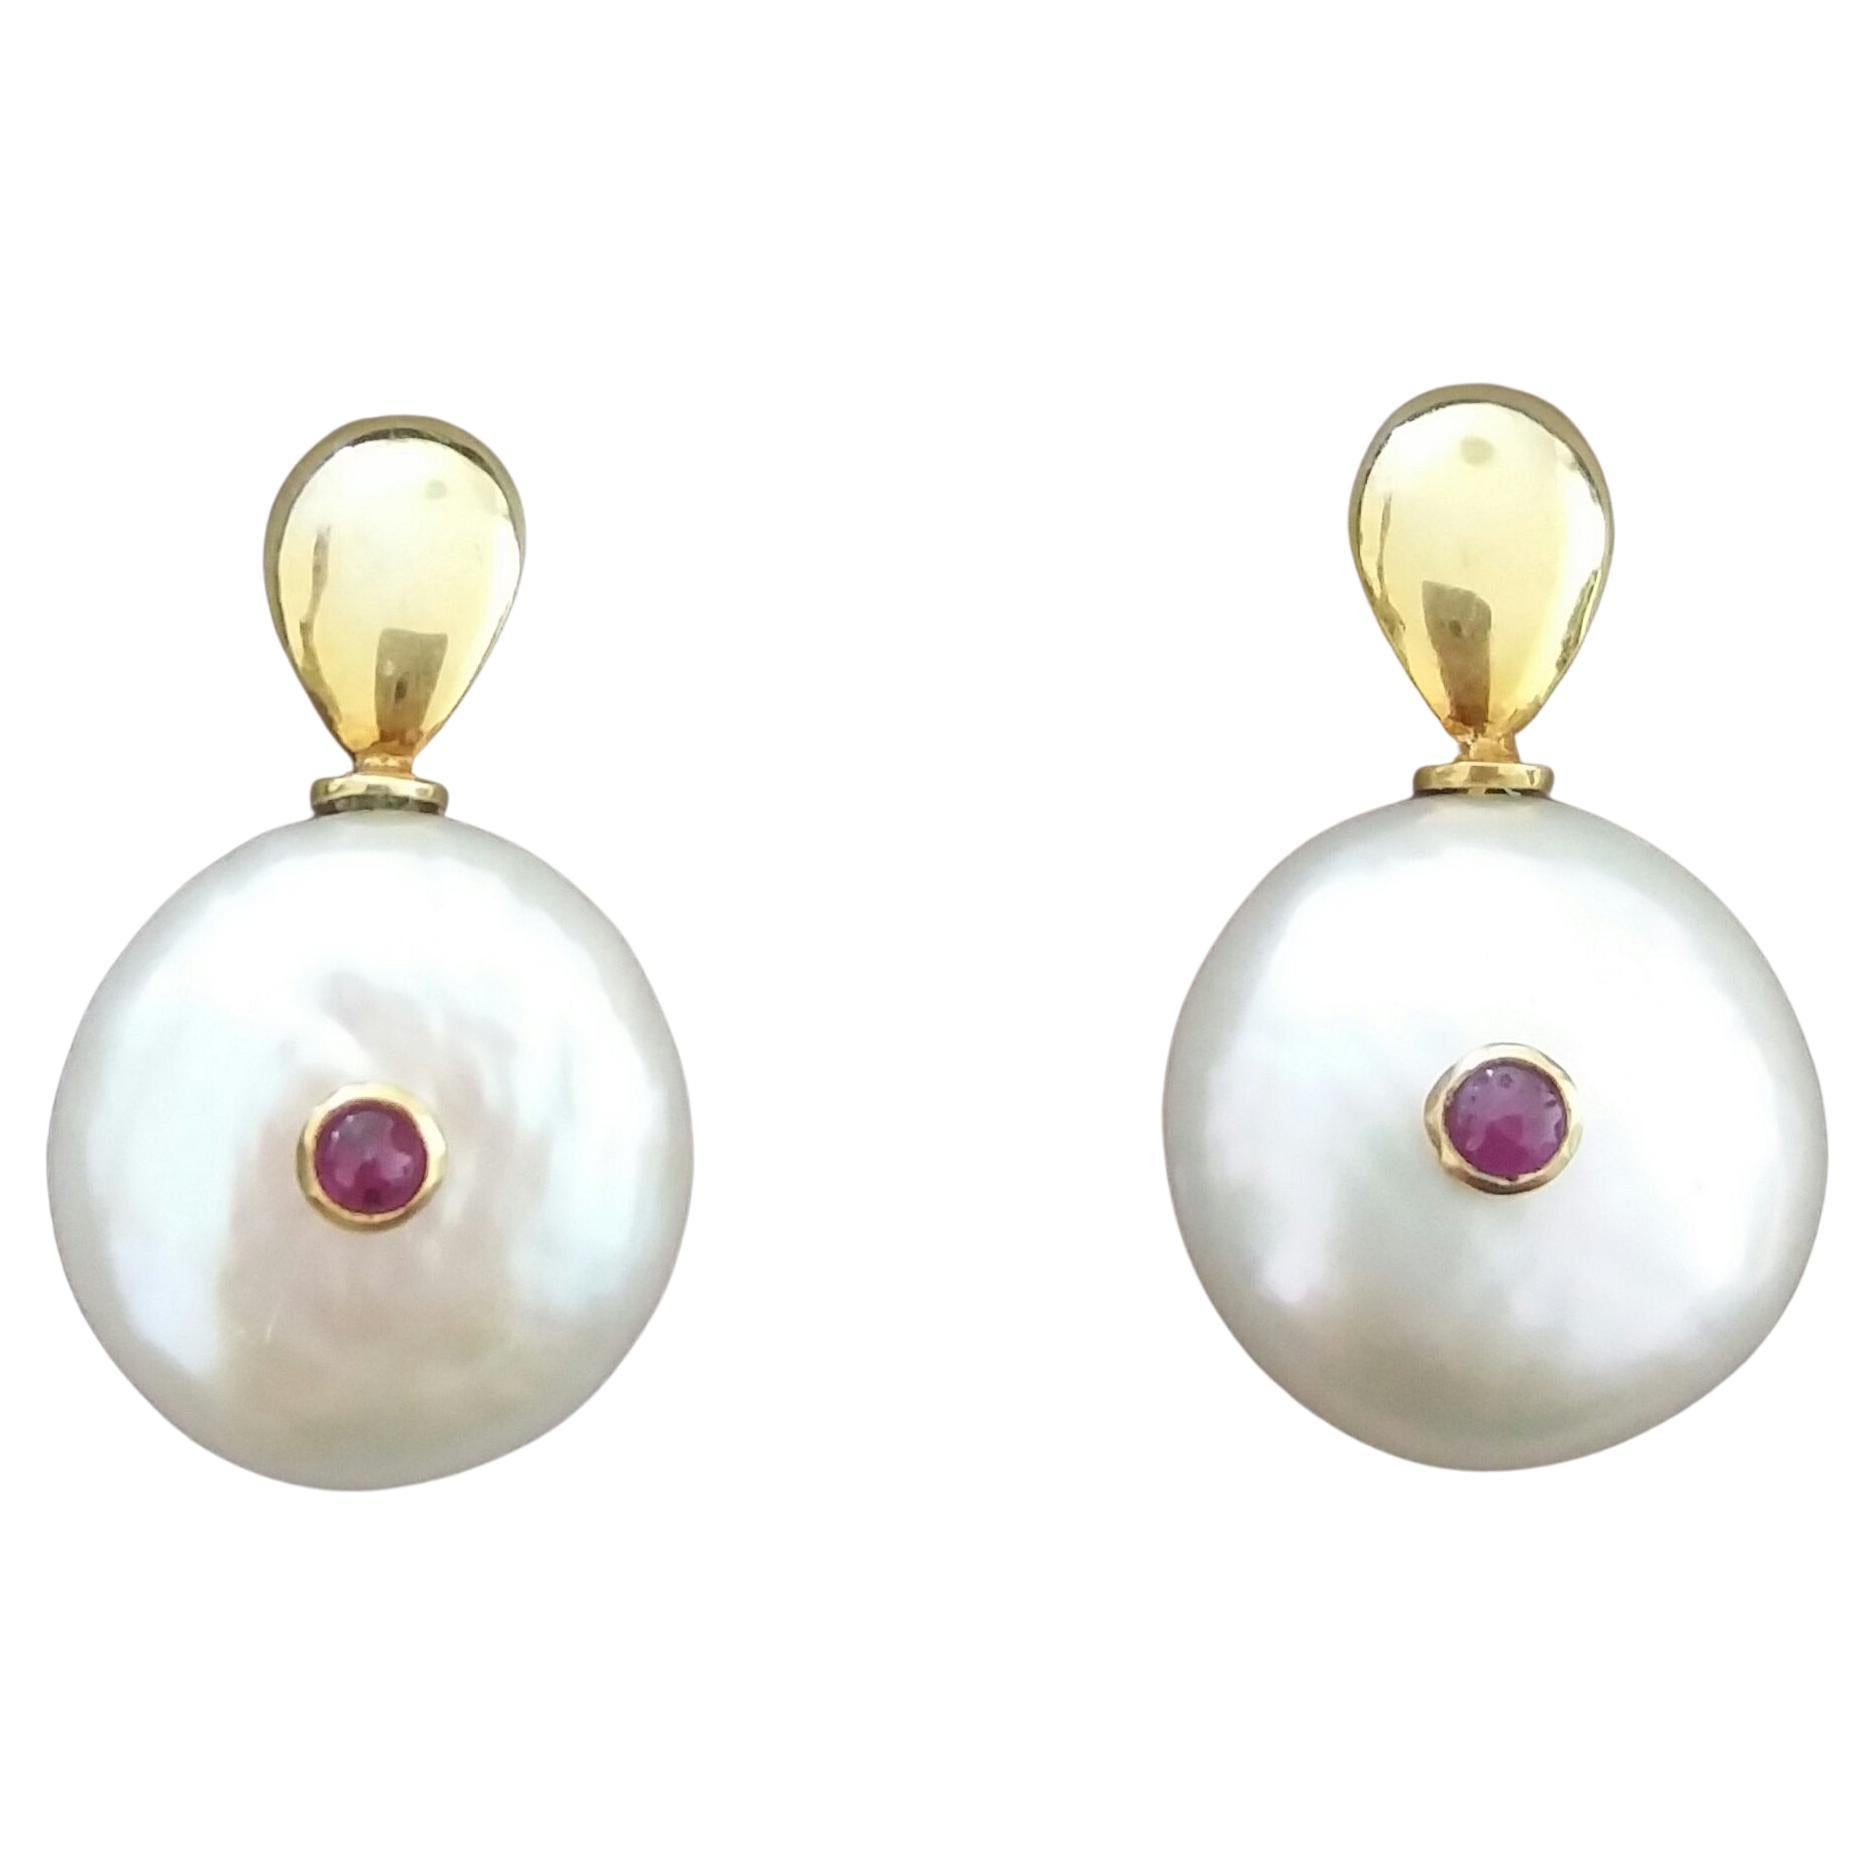 White Button Shape Baroque Pearls Round Ruby Cabs 14 K Yellow Gold Tops Earrings For Sale